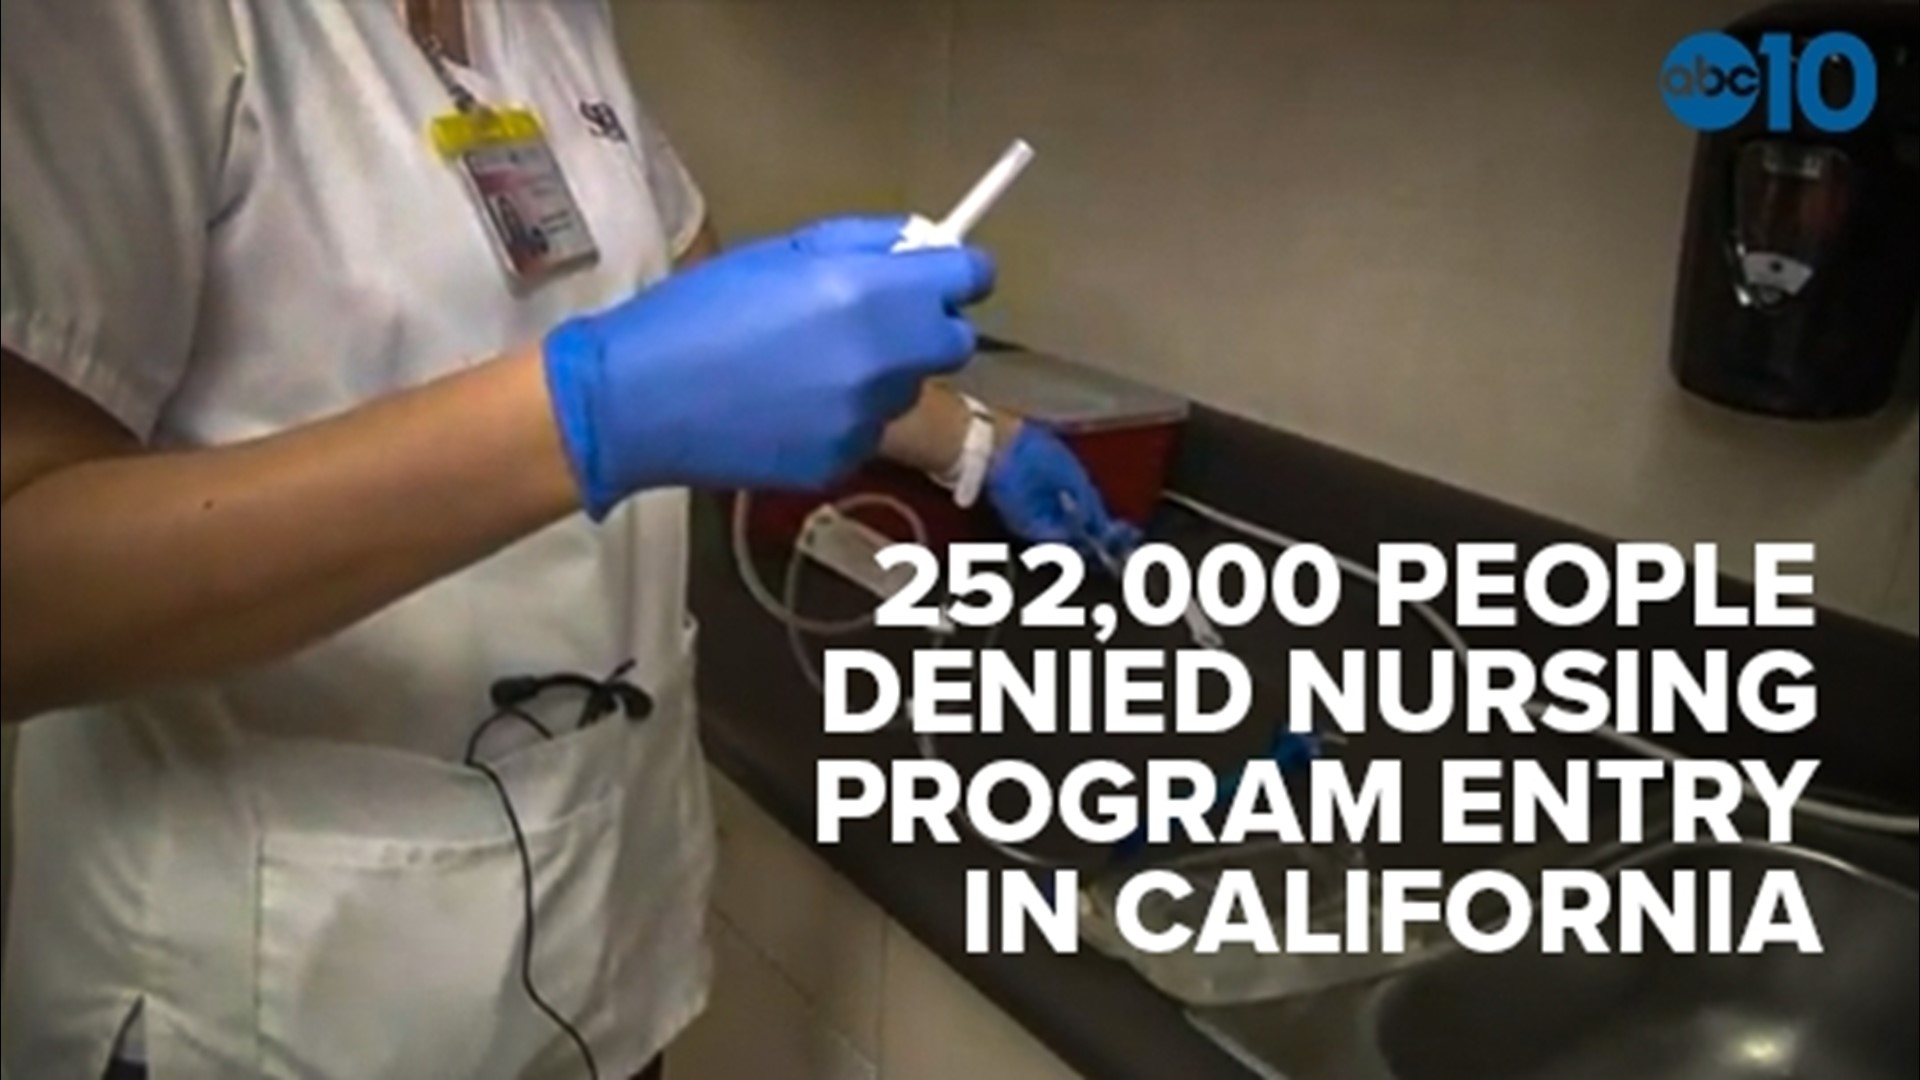 The California State Board of Registered Nursing has a cap on enrollment, according to Stand Up For Nurses, and this is causing a shortage and burnout of nurses.